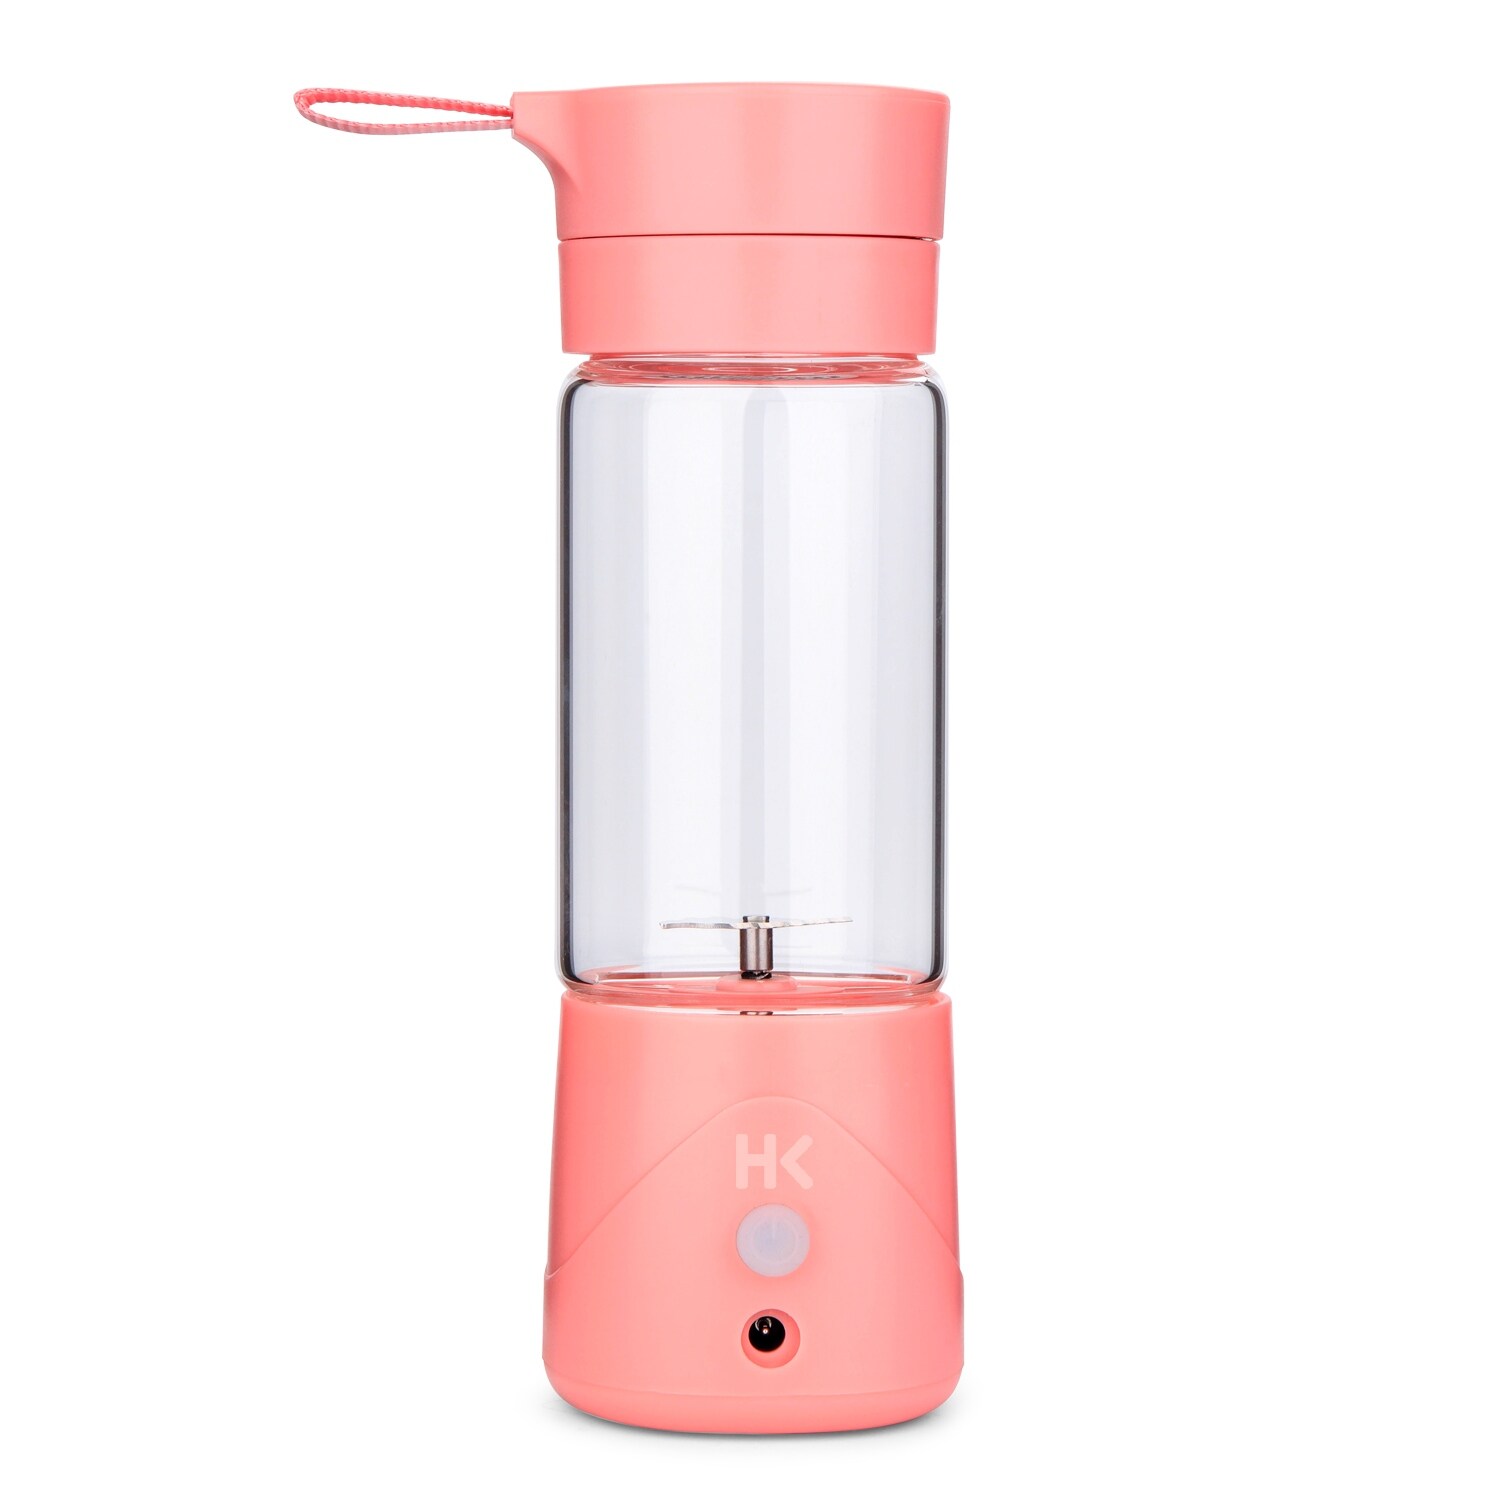 https://ak1.ostkcdn.com/images/products/is/images/direct/9866736b20875778fb2e1f06ac13ff1f36425e98/US-Portable-Rechargeable-Jet-Squeezers-Juicer-Mixer-Blend-Personal-Blender-Cup.jpg